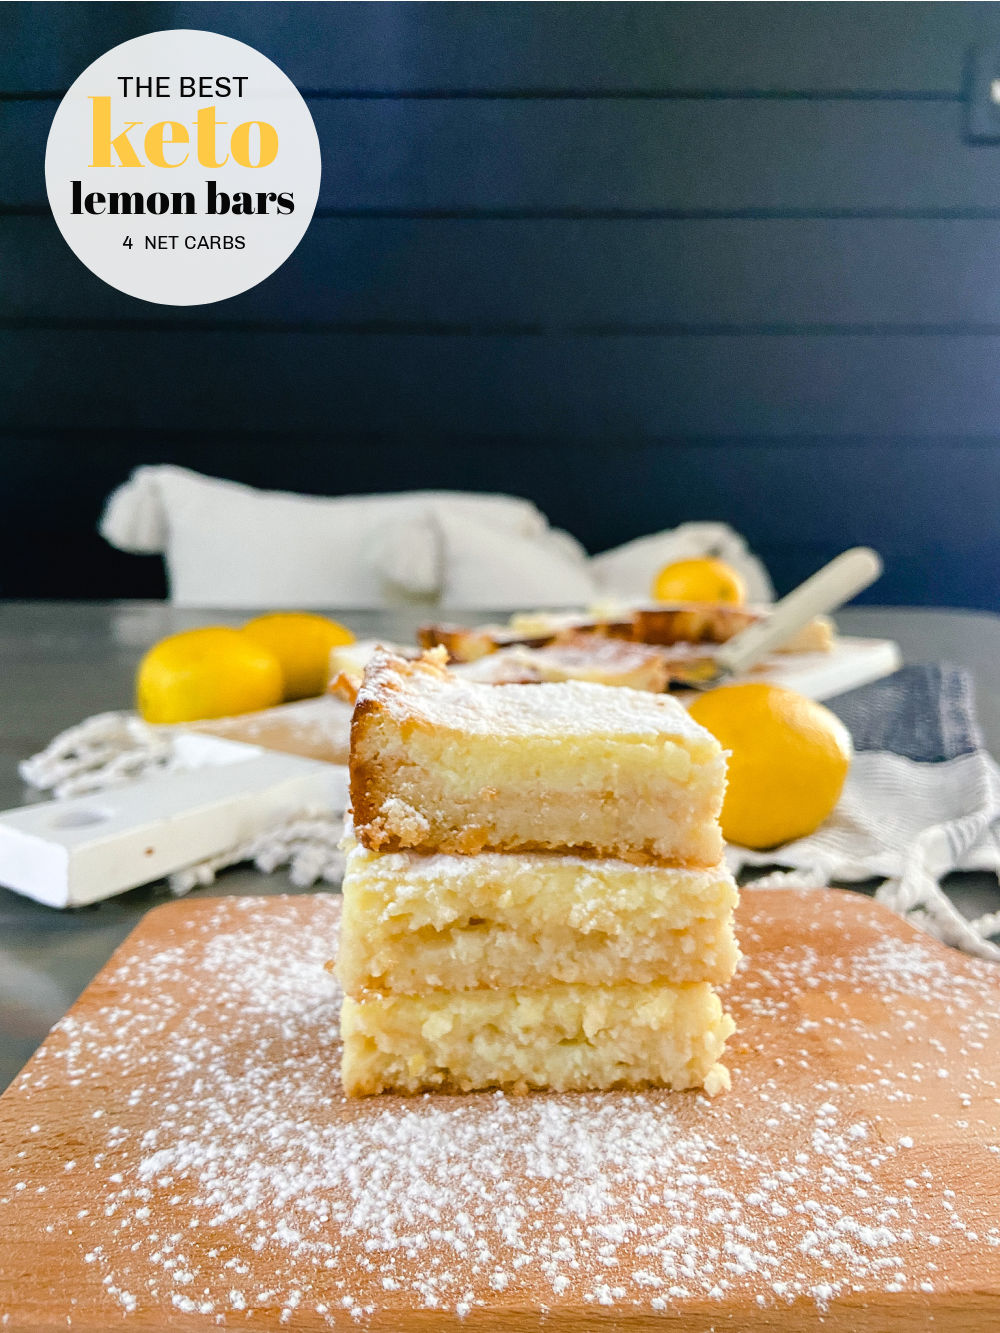 Keto Lemon Bars. These tangy lemon bars are the perfect combination of buttery crust and creamy lemon filling with only 4 net carbs!